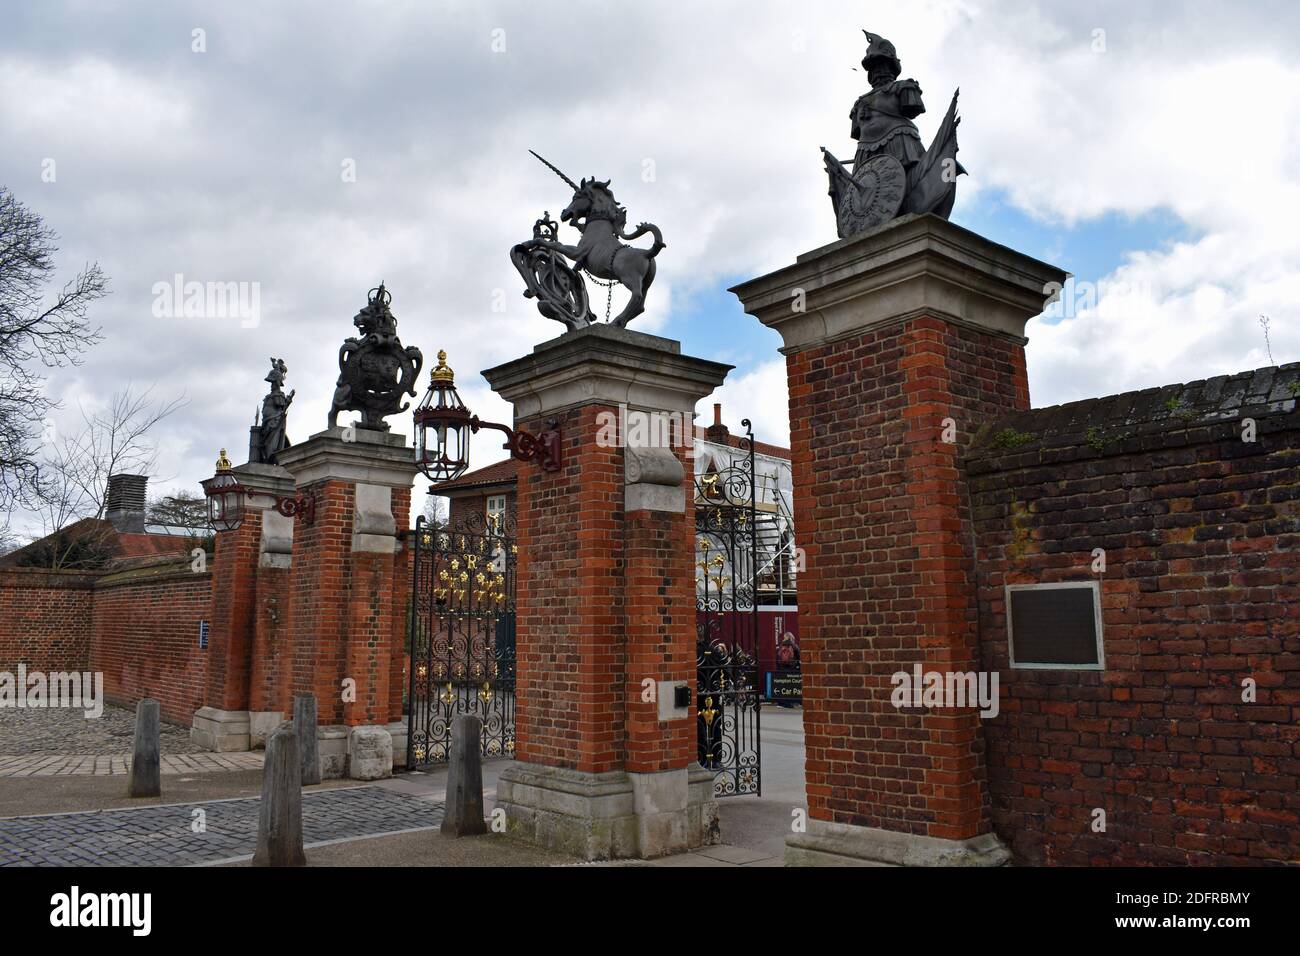 The main entrance gate that leads to the grounds of Hampton Court Palace in Richmond, London. Wall made from red brick and topped with sculptures. Stock Photo